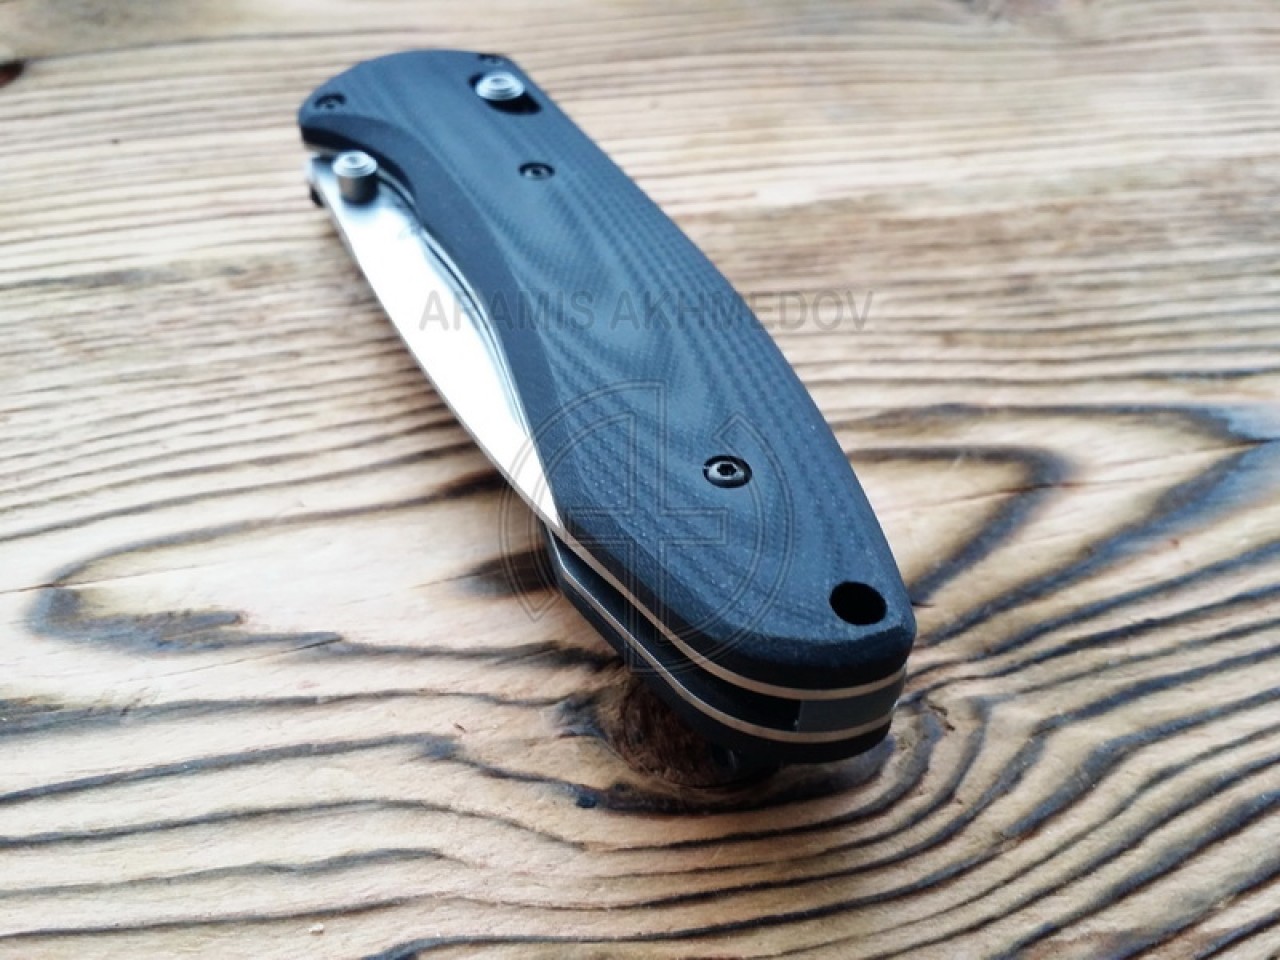 Custome scales Knife not included knife handles for Benchmade Boost 590 Model Elegant Black G10 